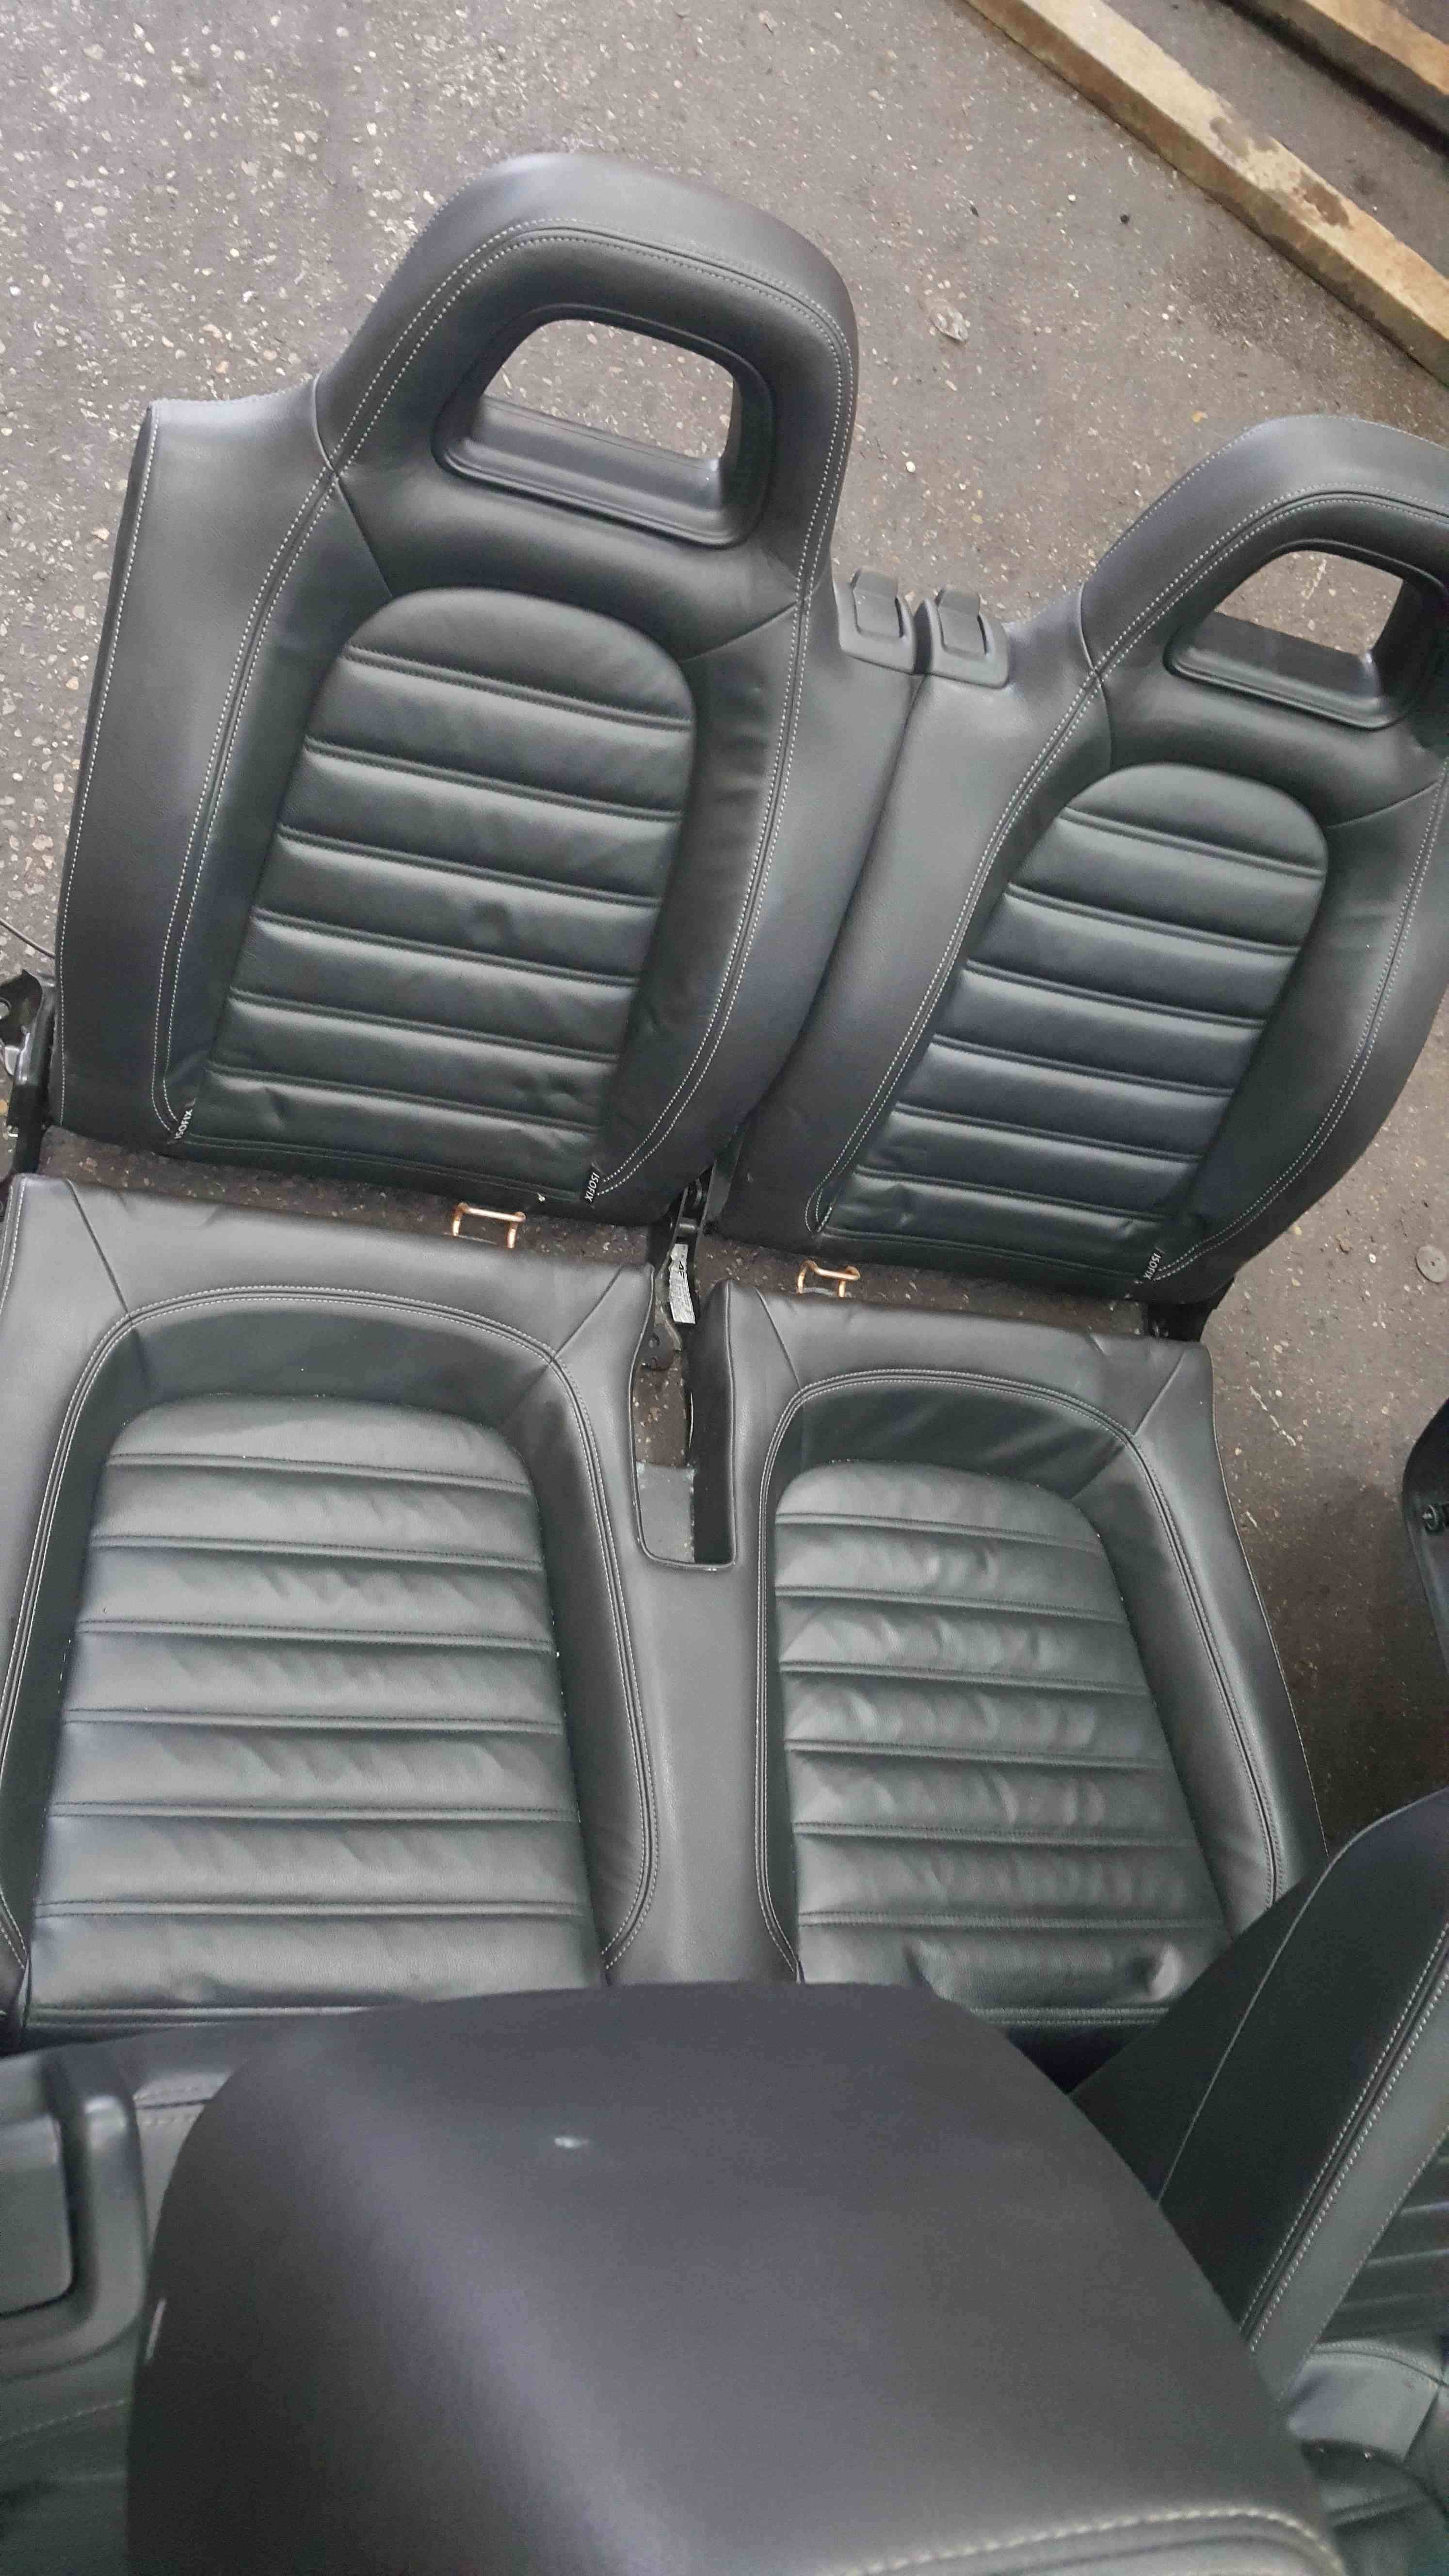 Volkswagen Scirocco 2008-2014 Full Leather Interior Black Seats Chairs 2 Cards